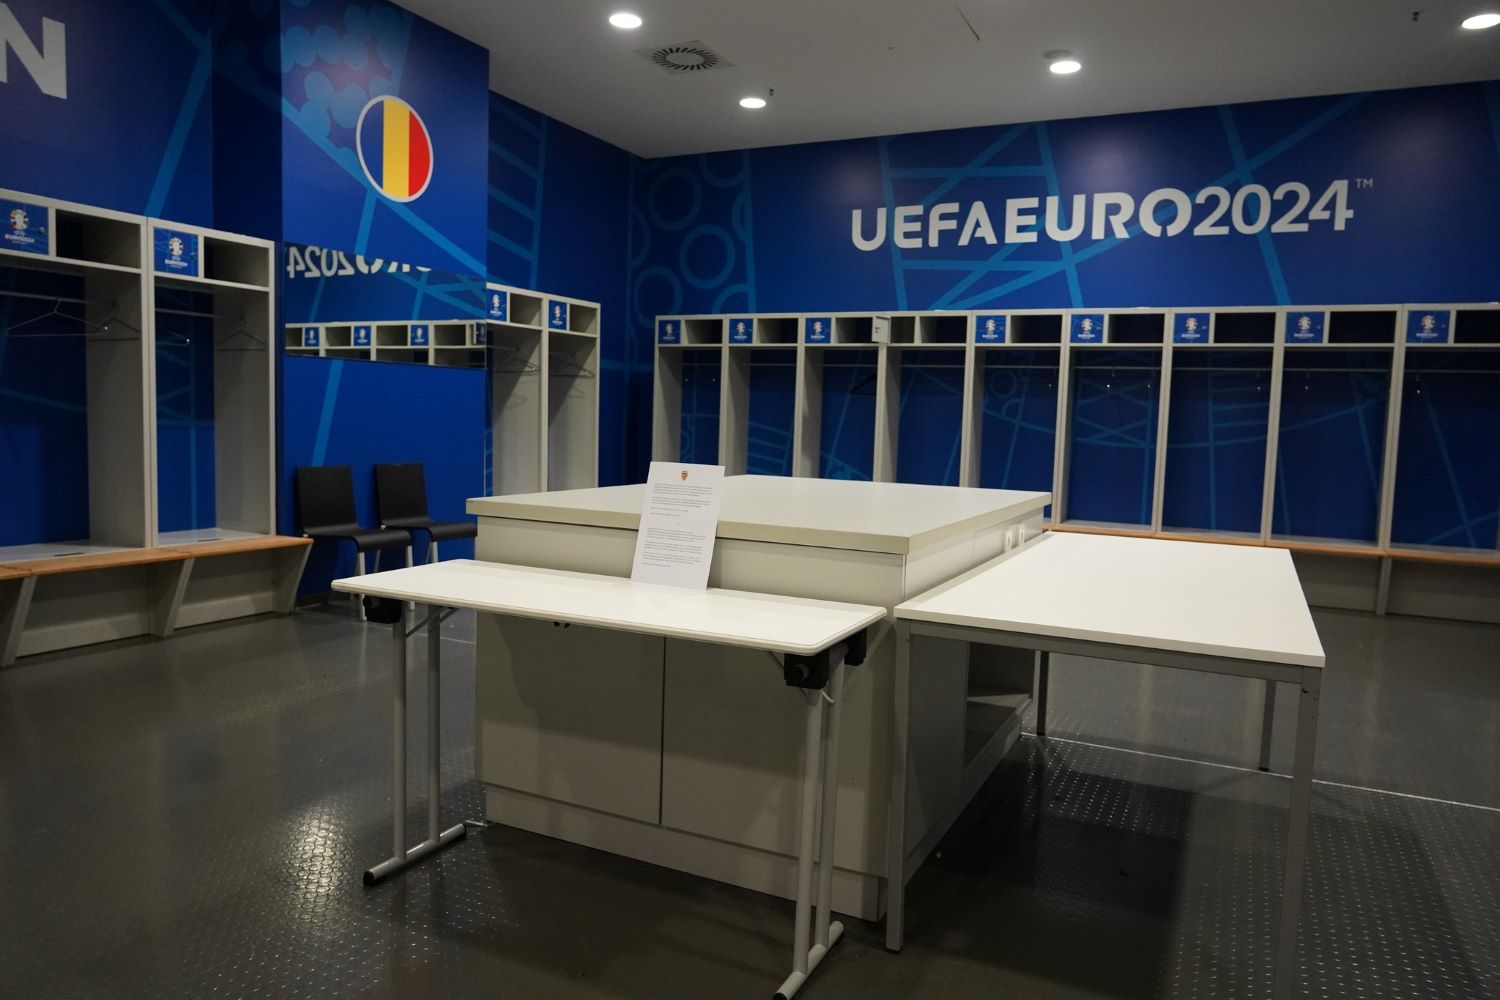 Romania leaves EURO 2024 in Germany with impeccable locker room and a letter